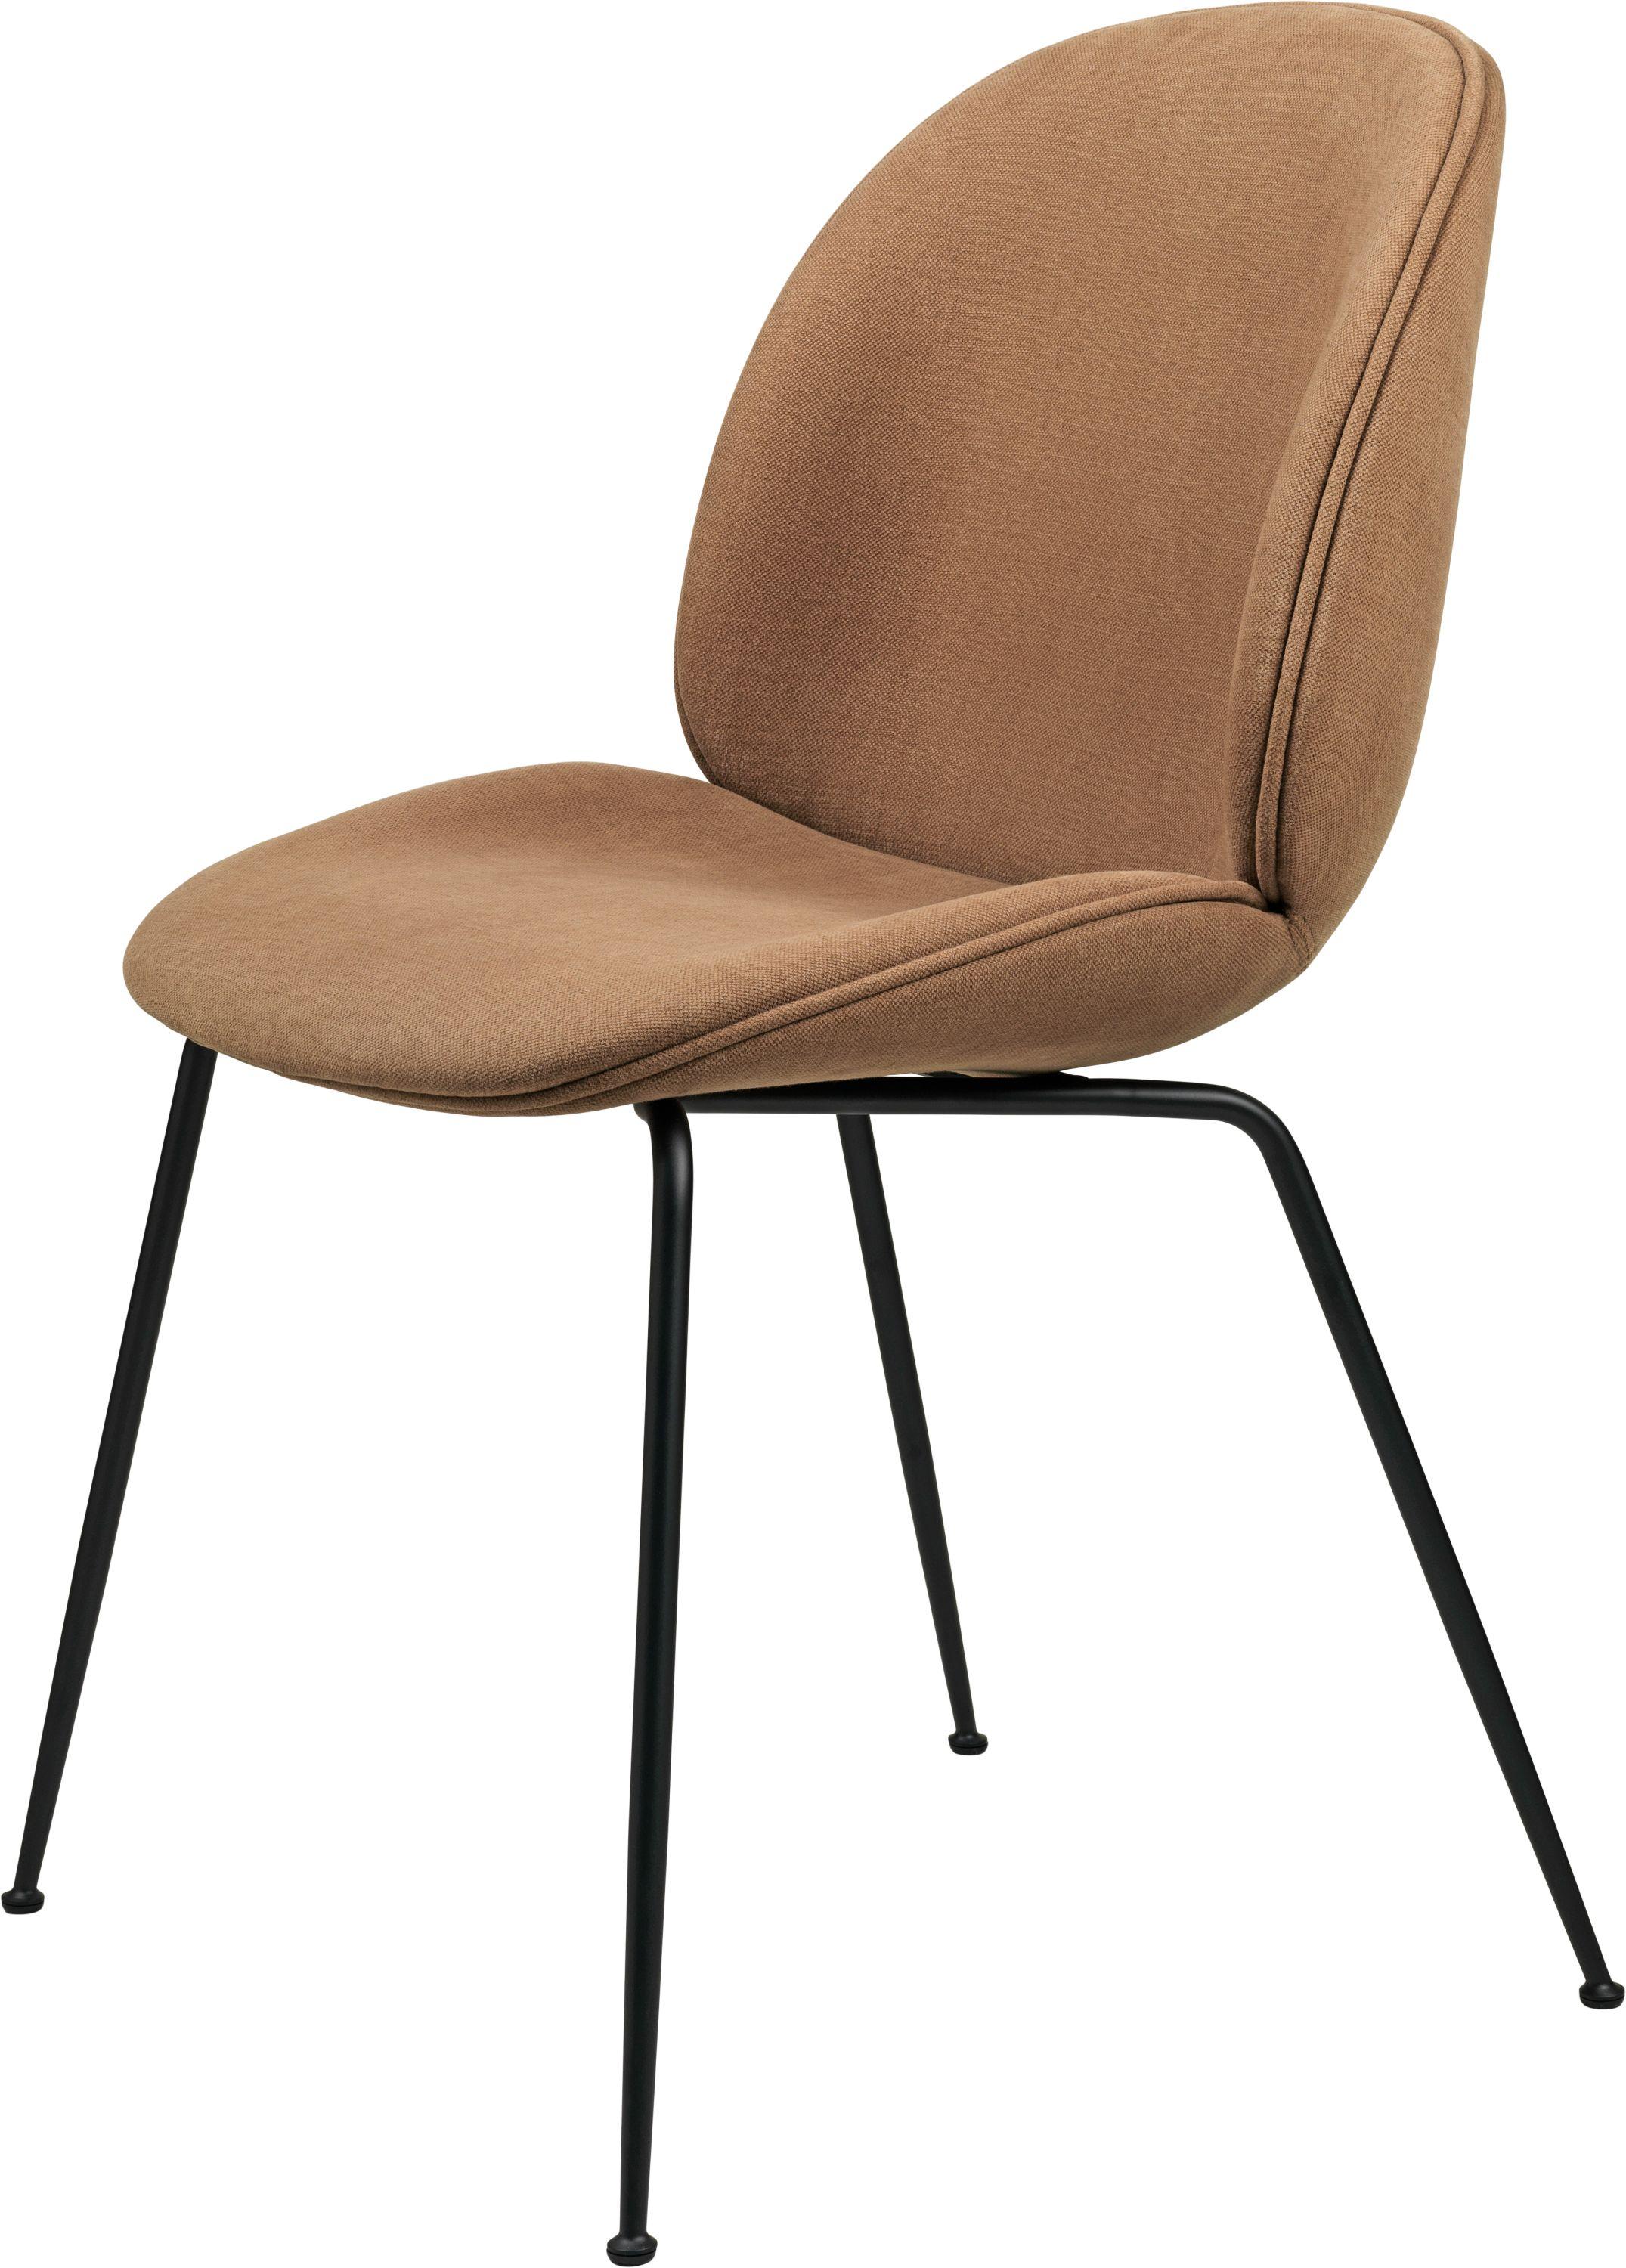 GamFratesi 'Beetle' Dining Chair in Blue with Conic Base 6